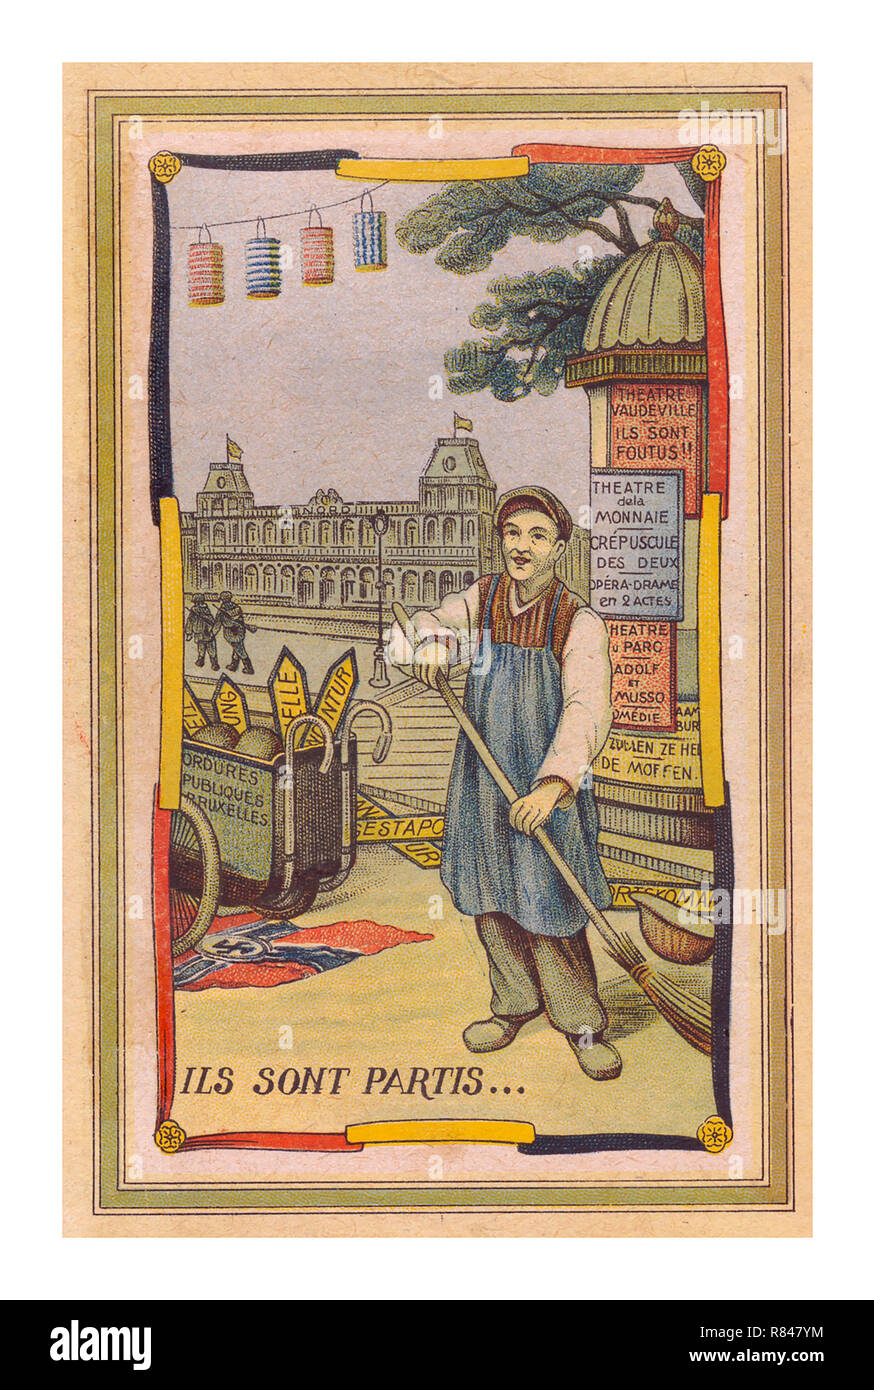 Vintage post-war Belgian Postcard “ILS SONT PARTIS...’ Propaganda 1945  'They Have Left' with street sweeper cleaning a Bruxelles Street with Gare du Nord station behind, with old Nazi Germany signs in his barrow with Nazi mocking theatre posters promoting new post war shows behind Stock Photo